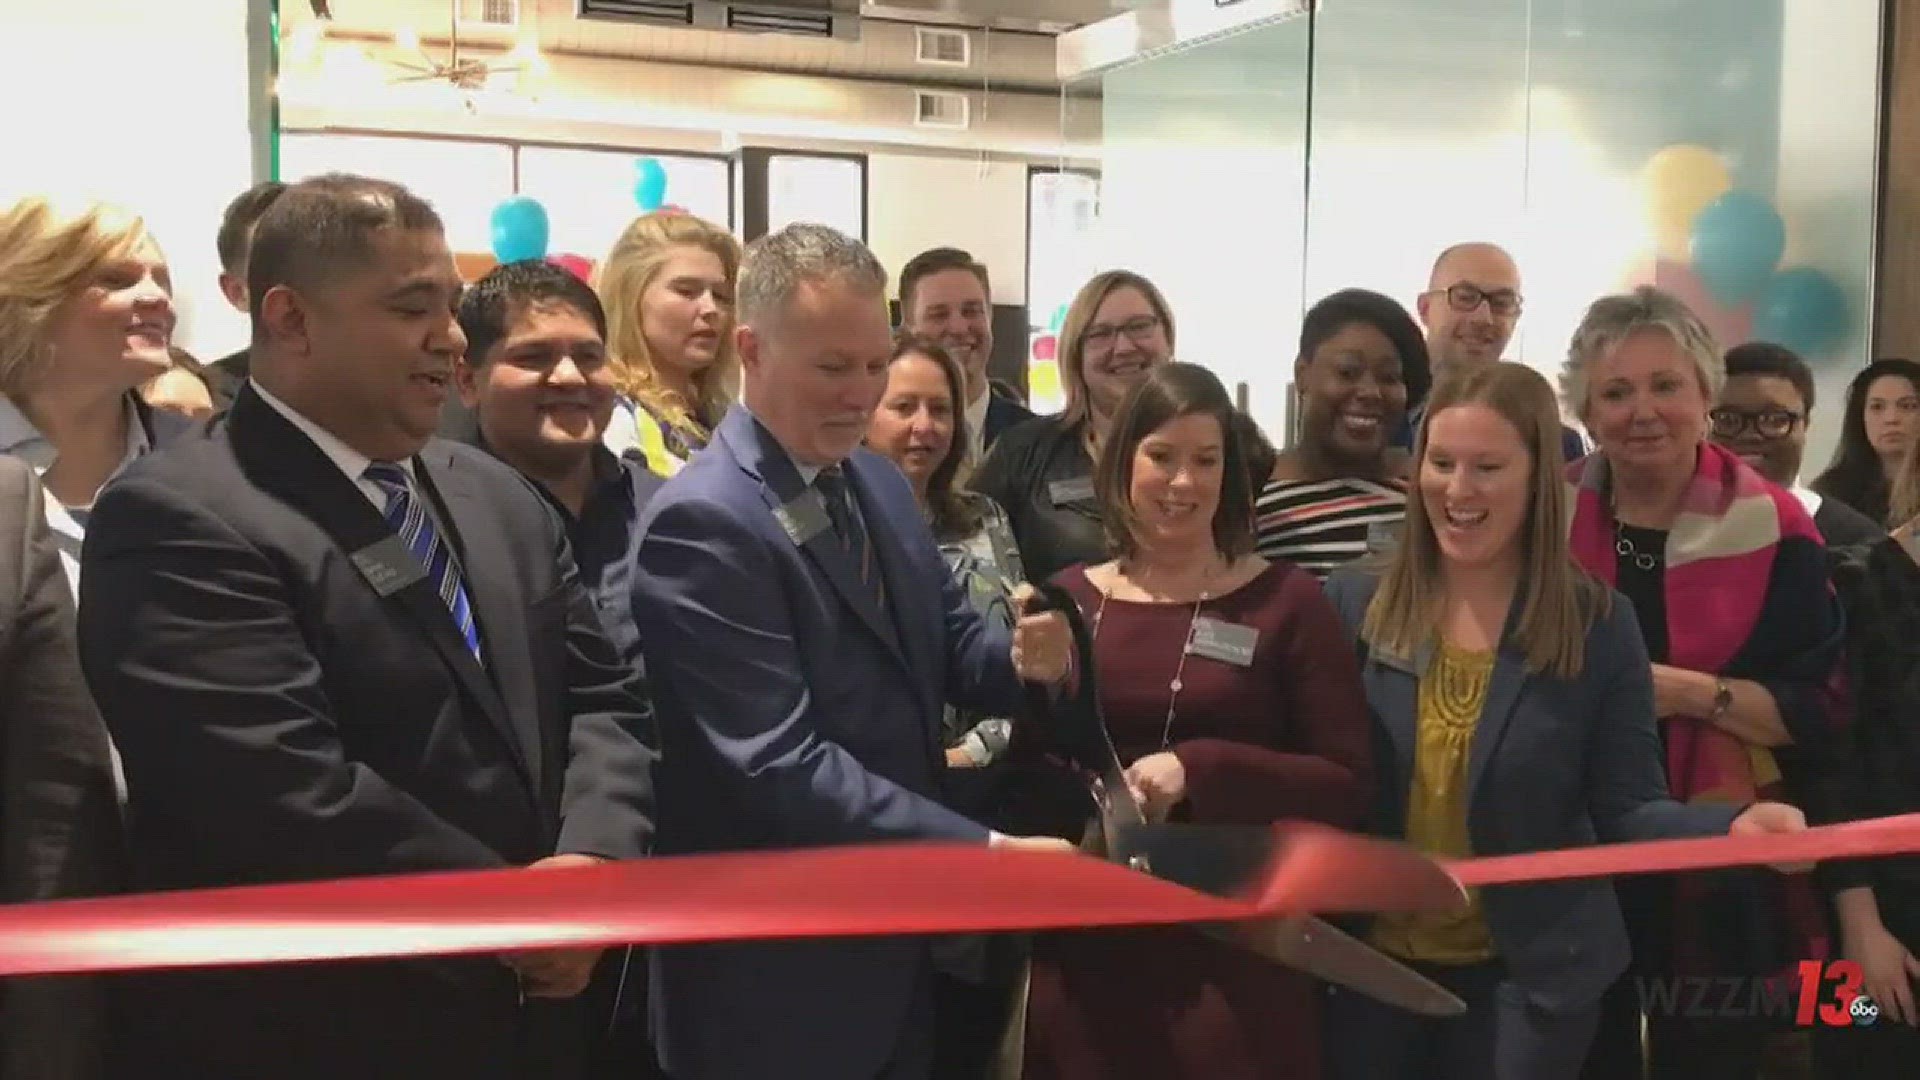 Grand Rapids Chamber of Commerce opens new location